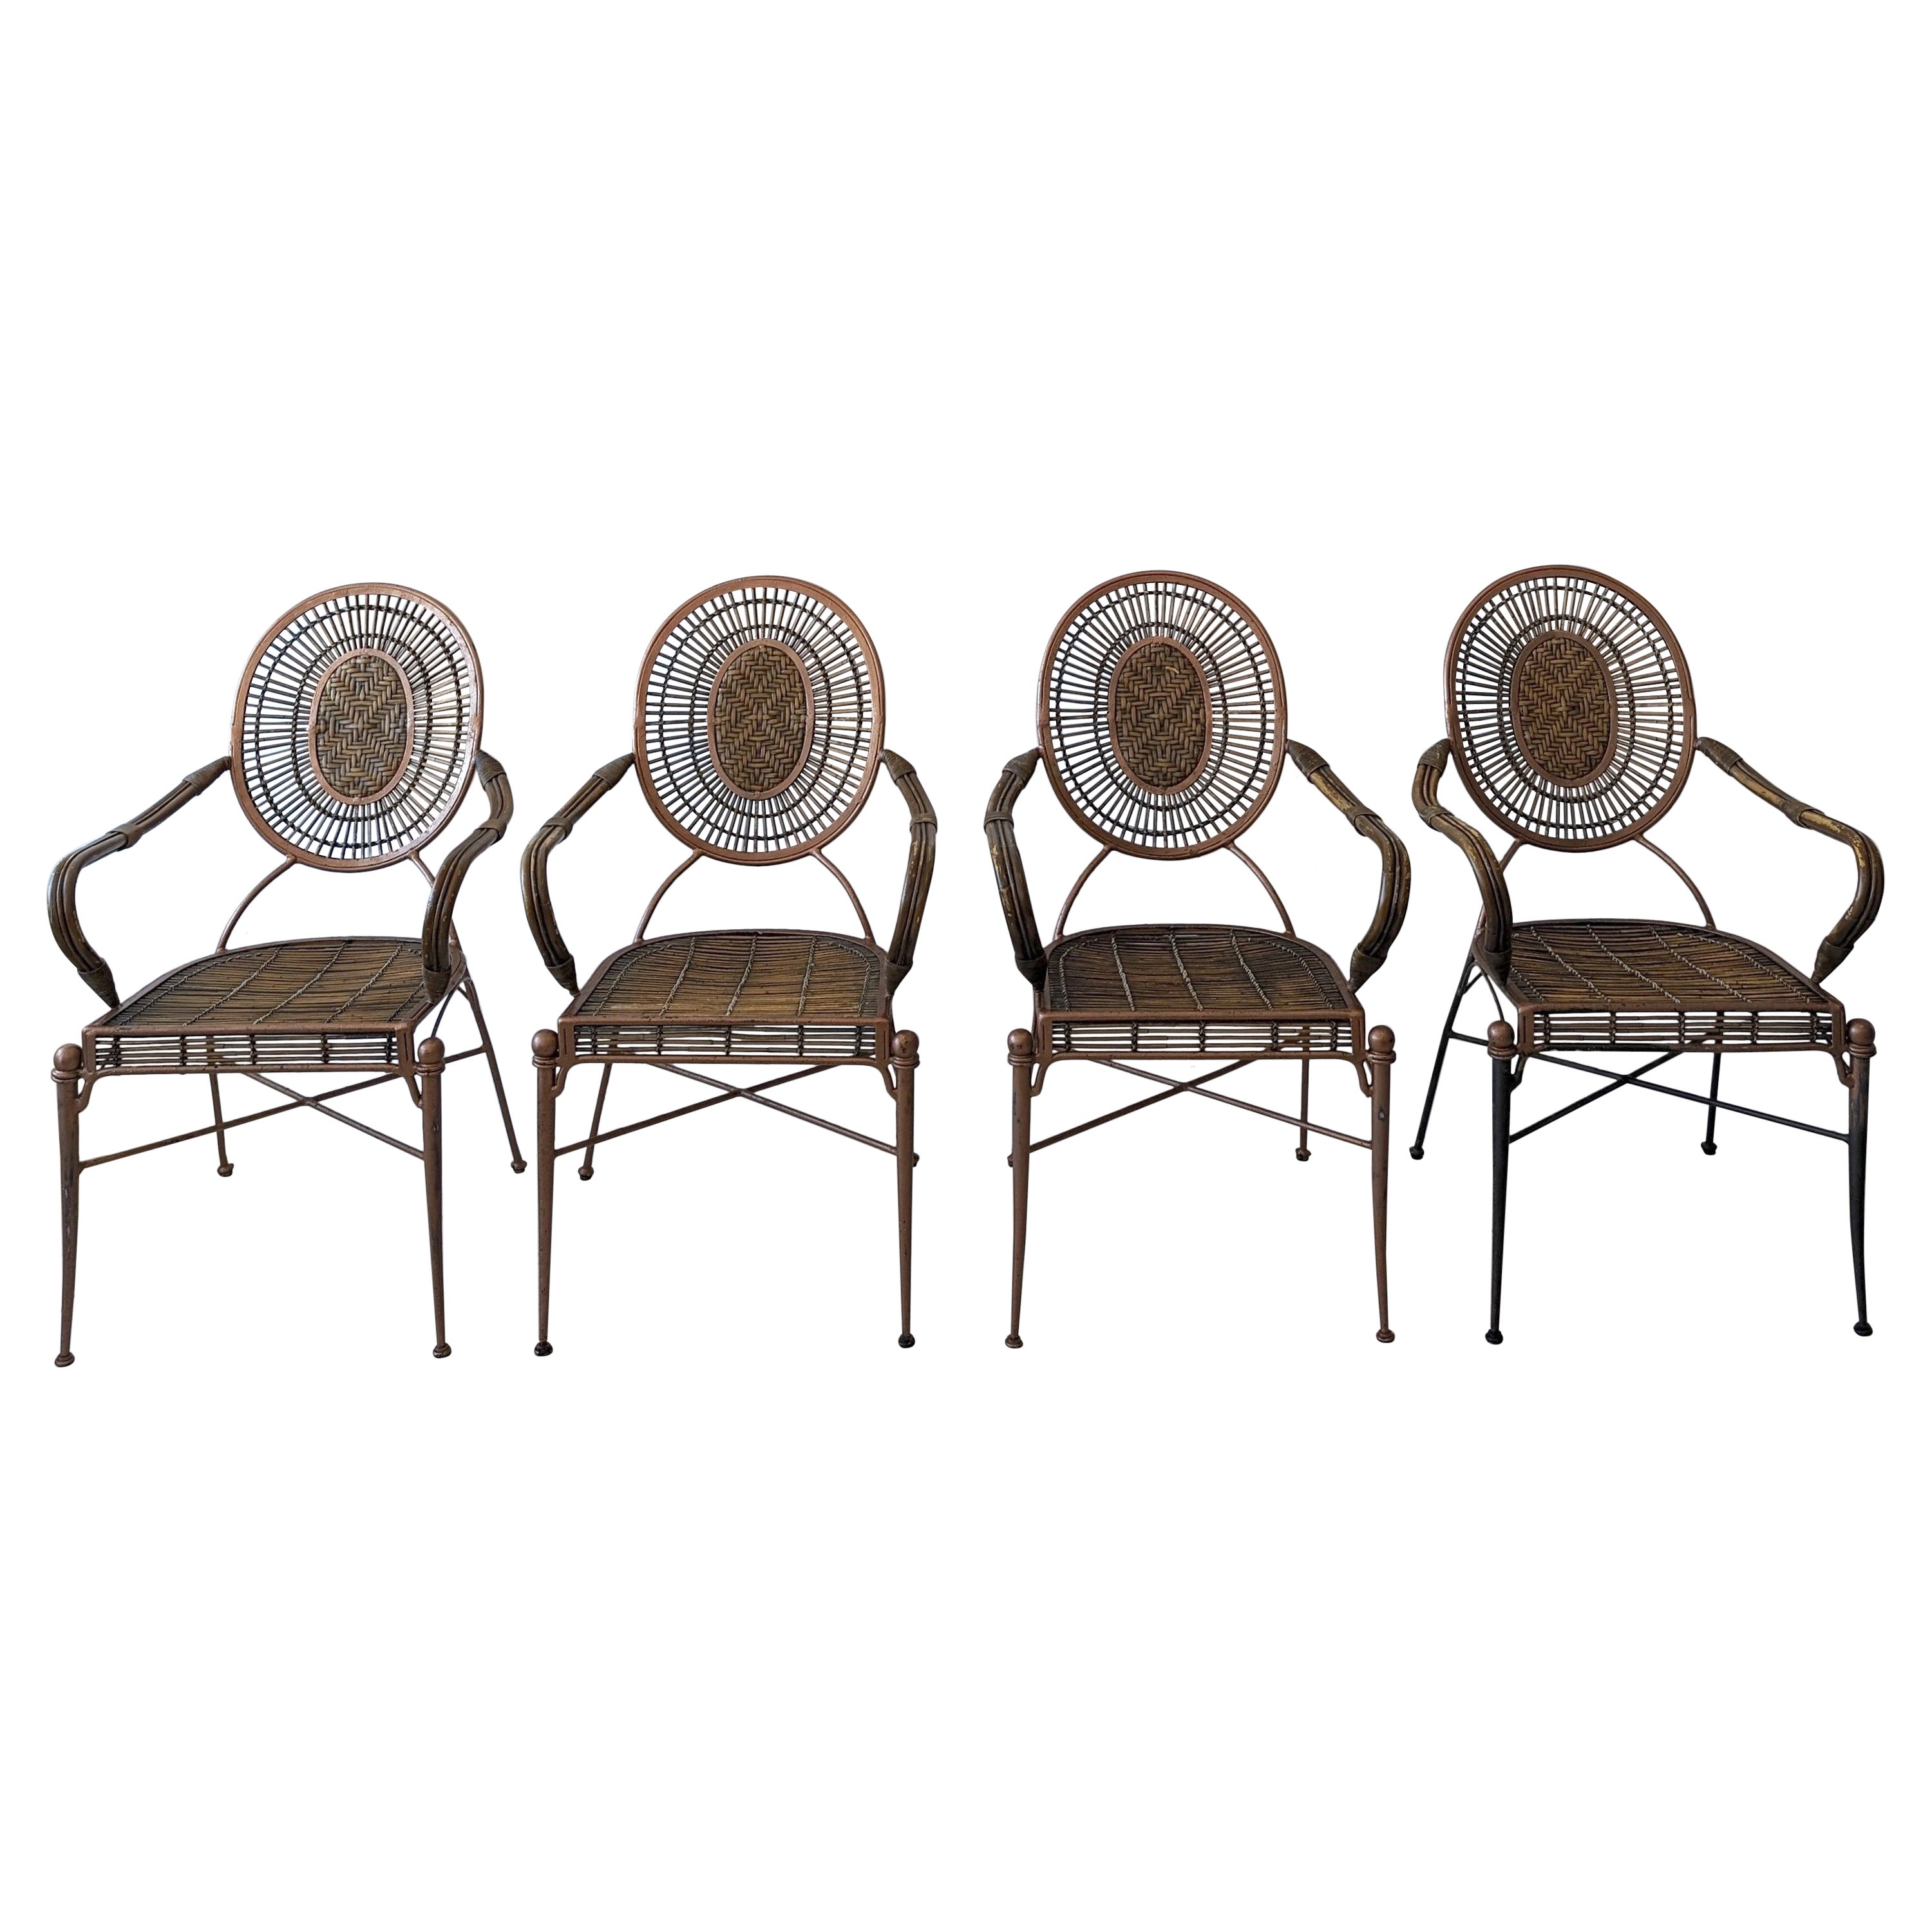 Vintage midcentury iron, cane and rattan armchairs dining chairs: 4 available